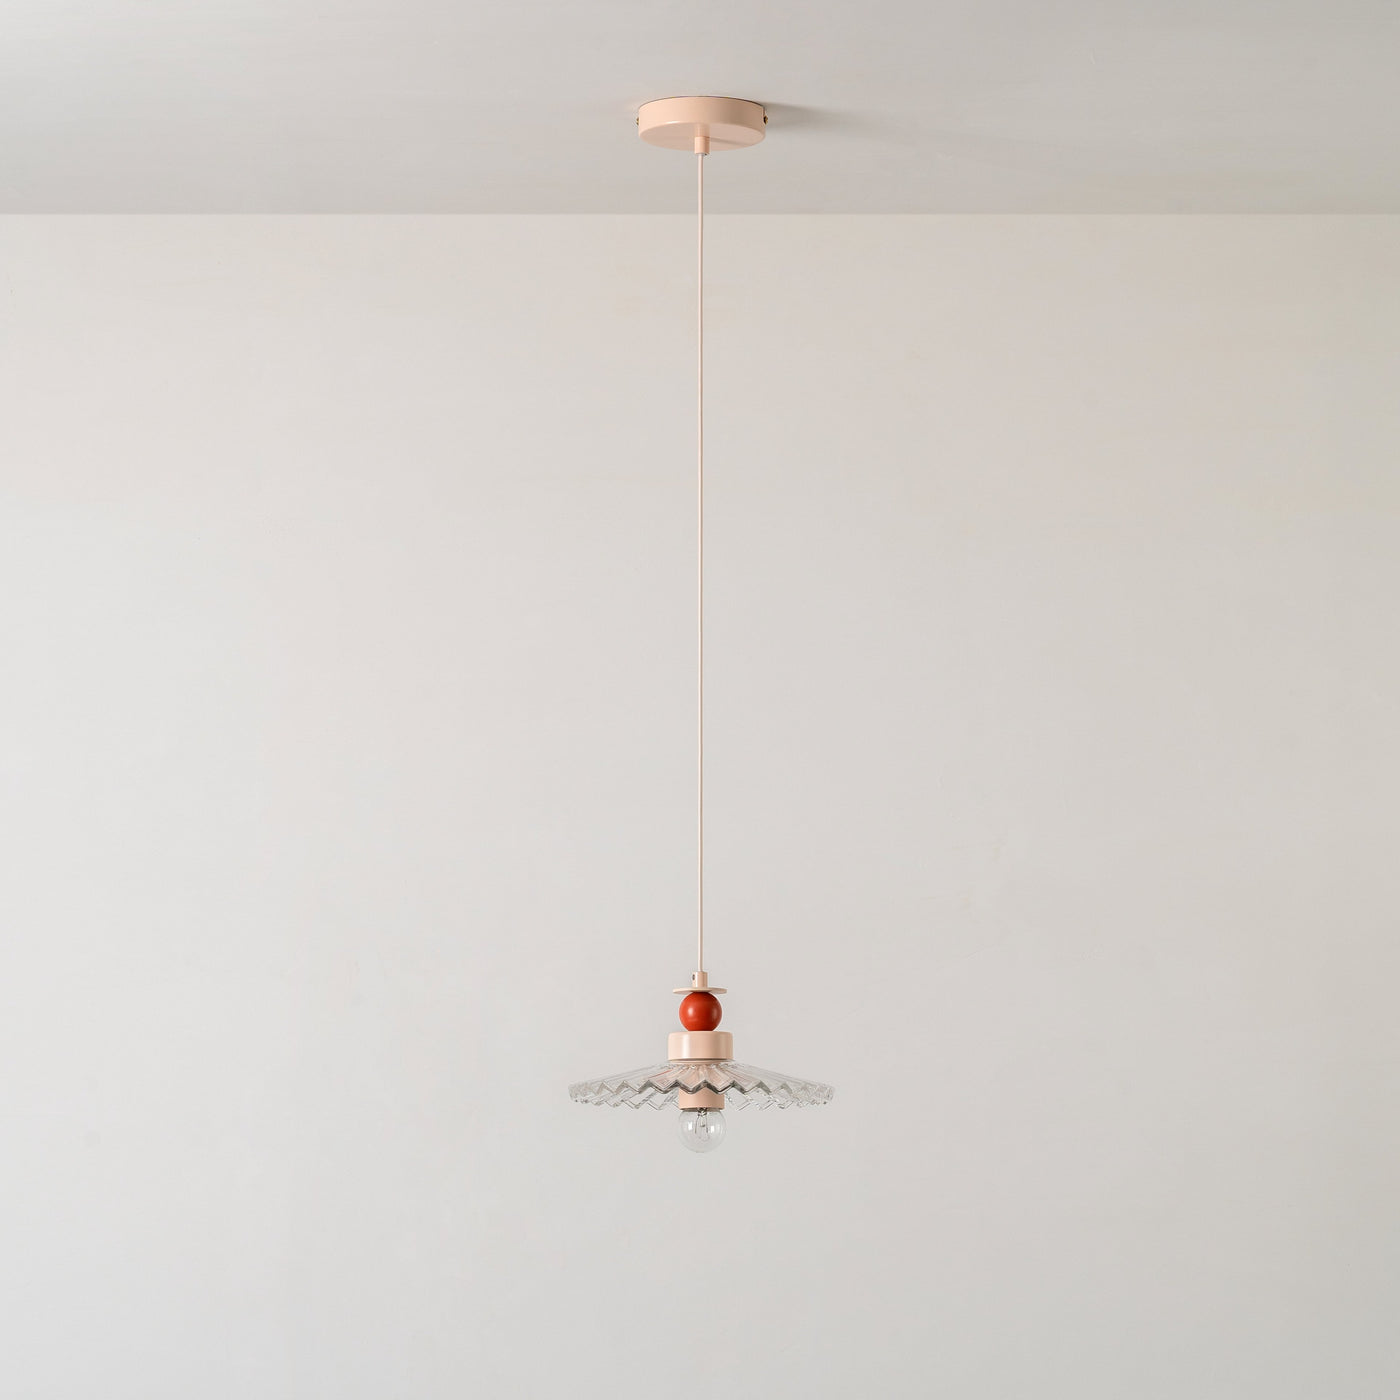 Houseof Ribbed Pendant Ceiling Light designed by Emma Gurner. Available from someday designs.